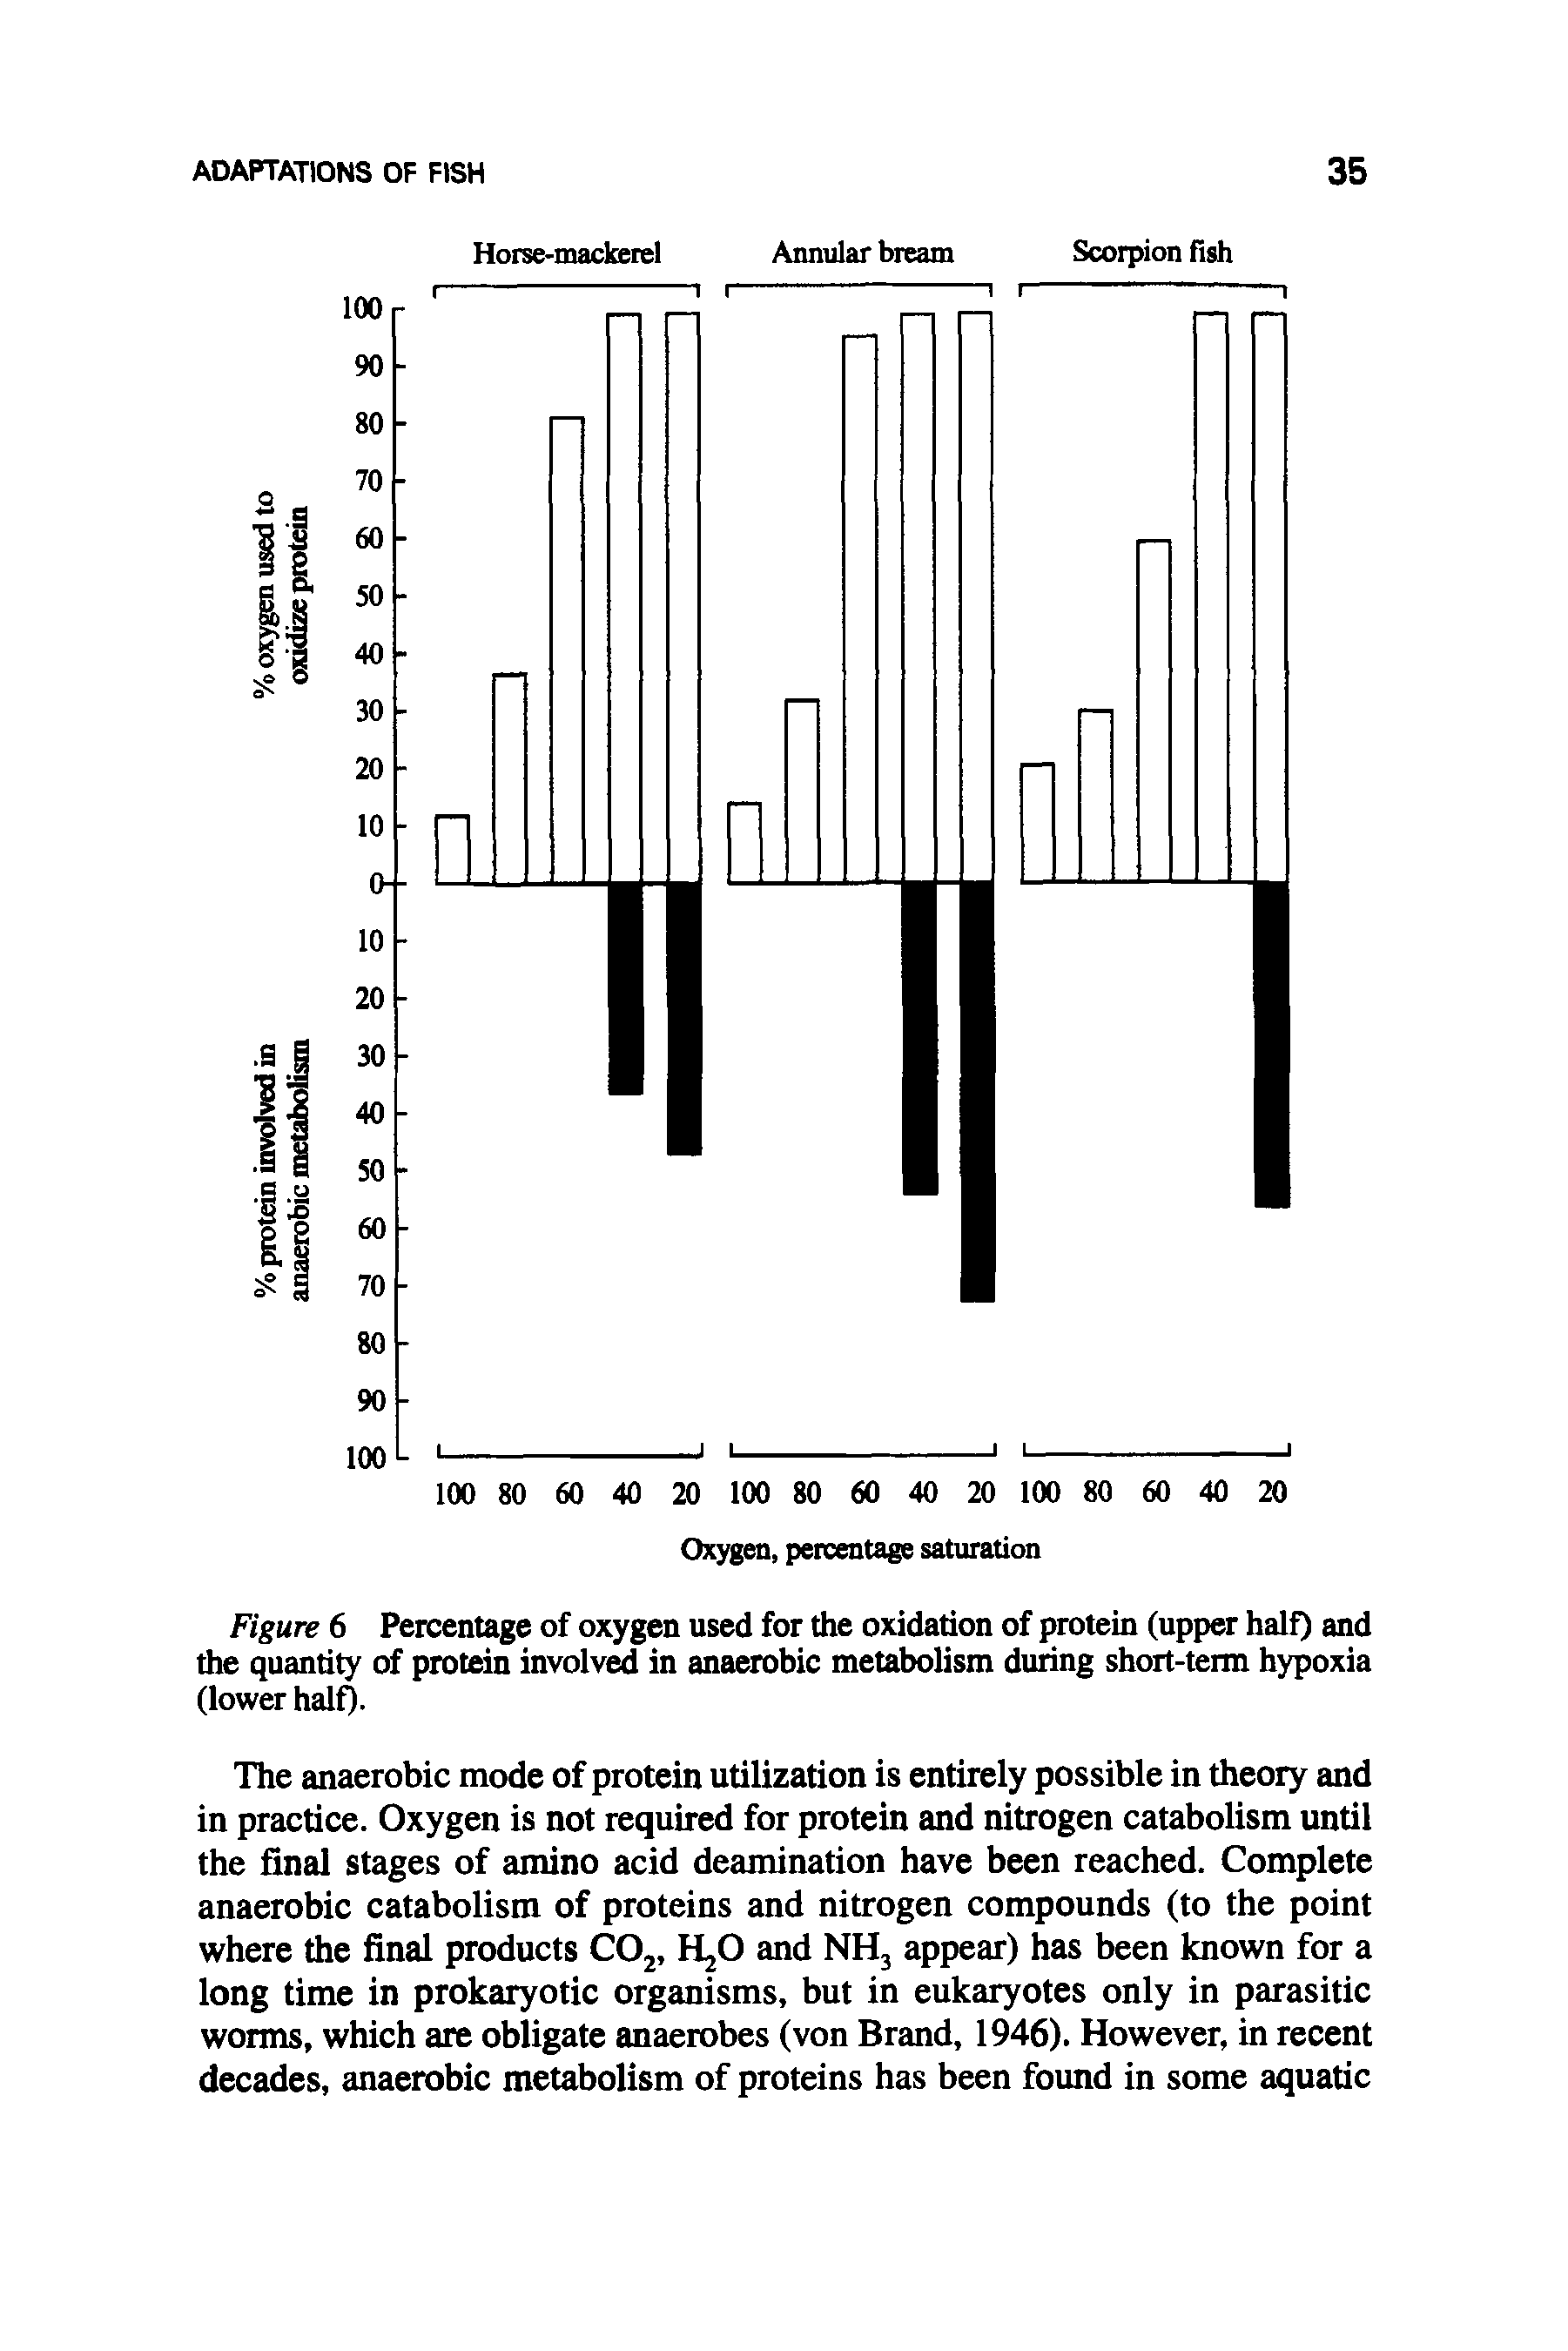 Figure 6 Percentage of oxygen used for the oxidation of protein (upper half) and the quantity of protein involved in anaerobic metabolism during short-term hypoxia (lower half).